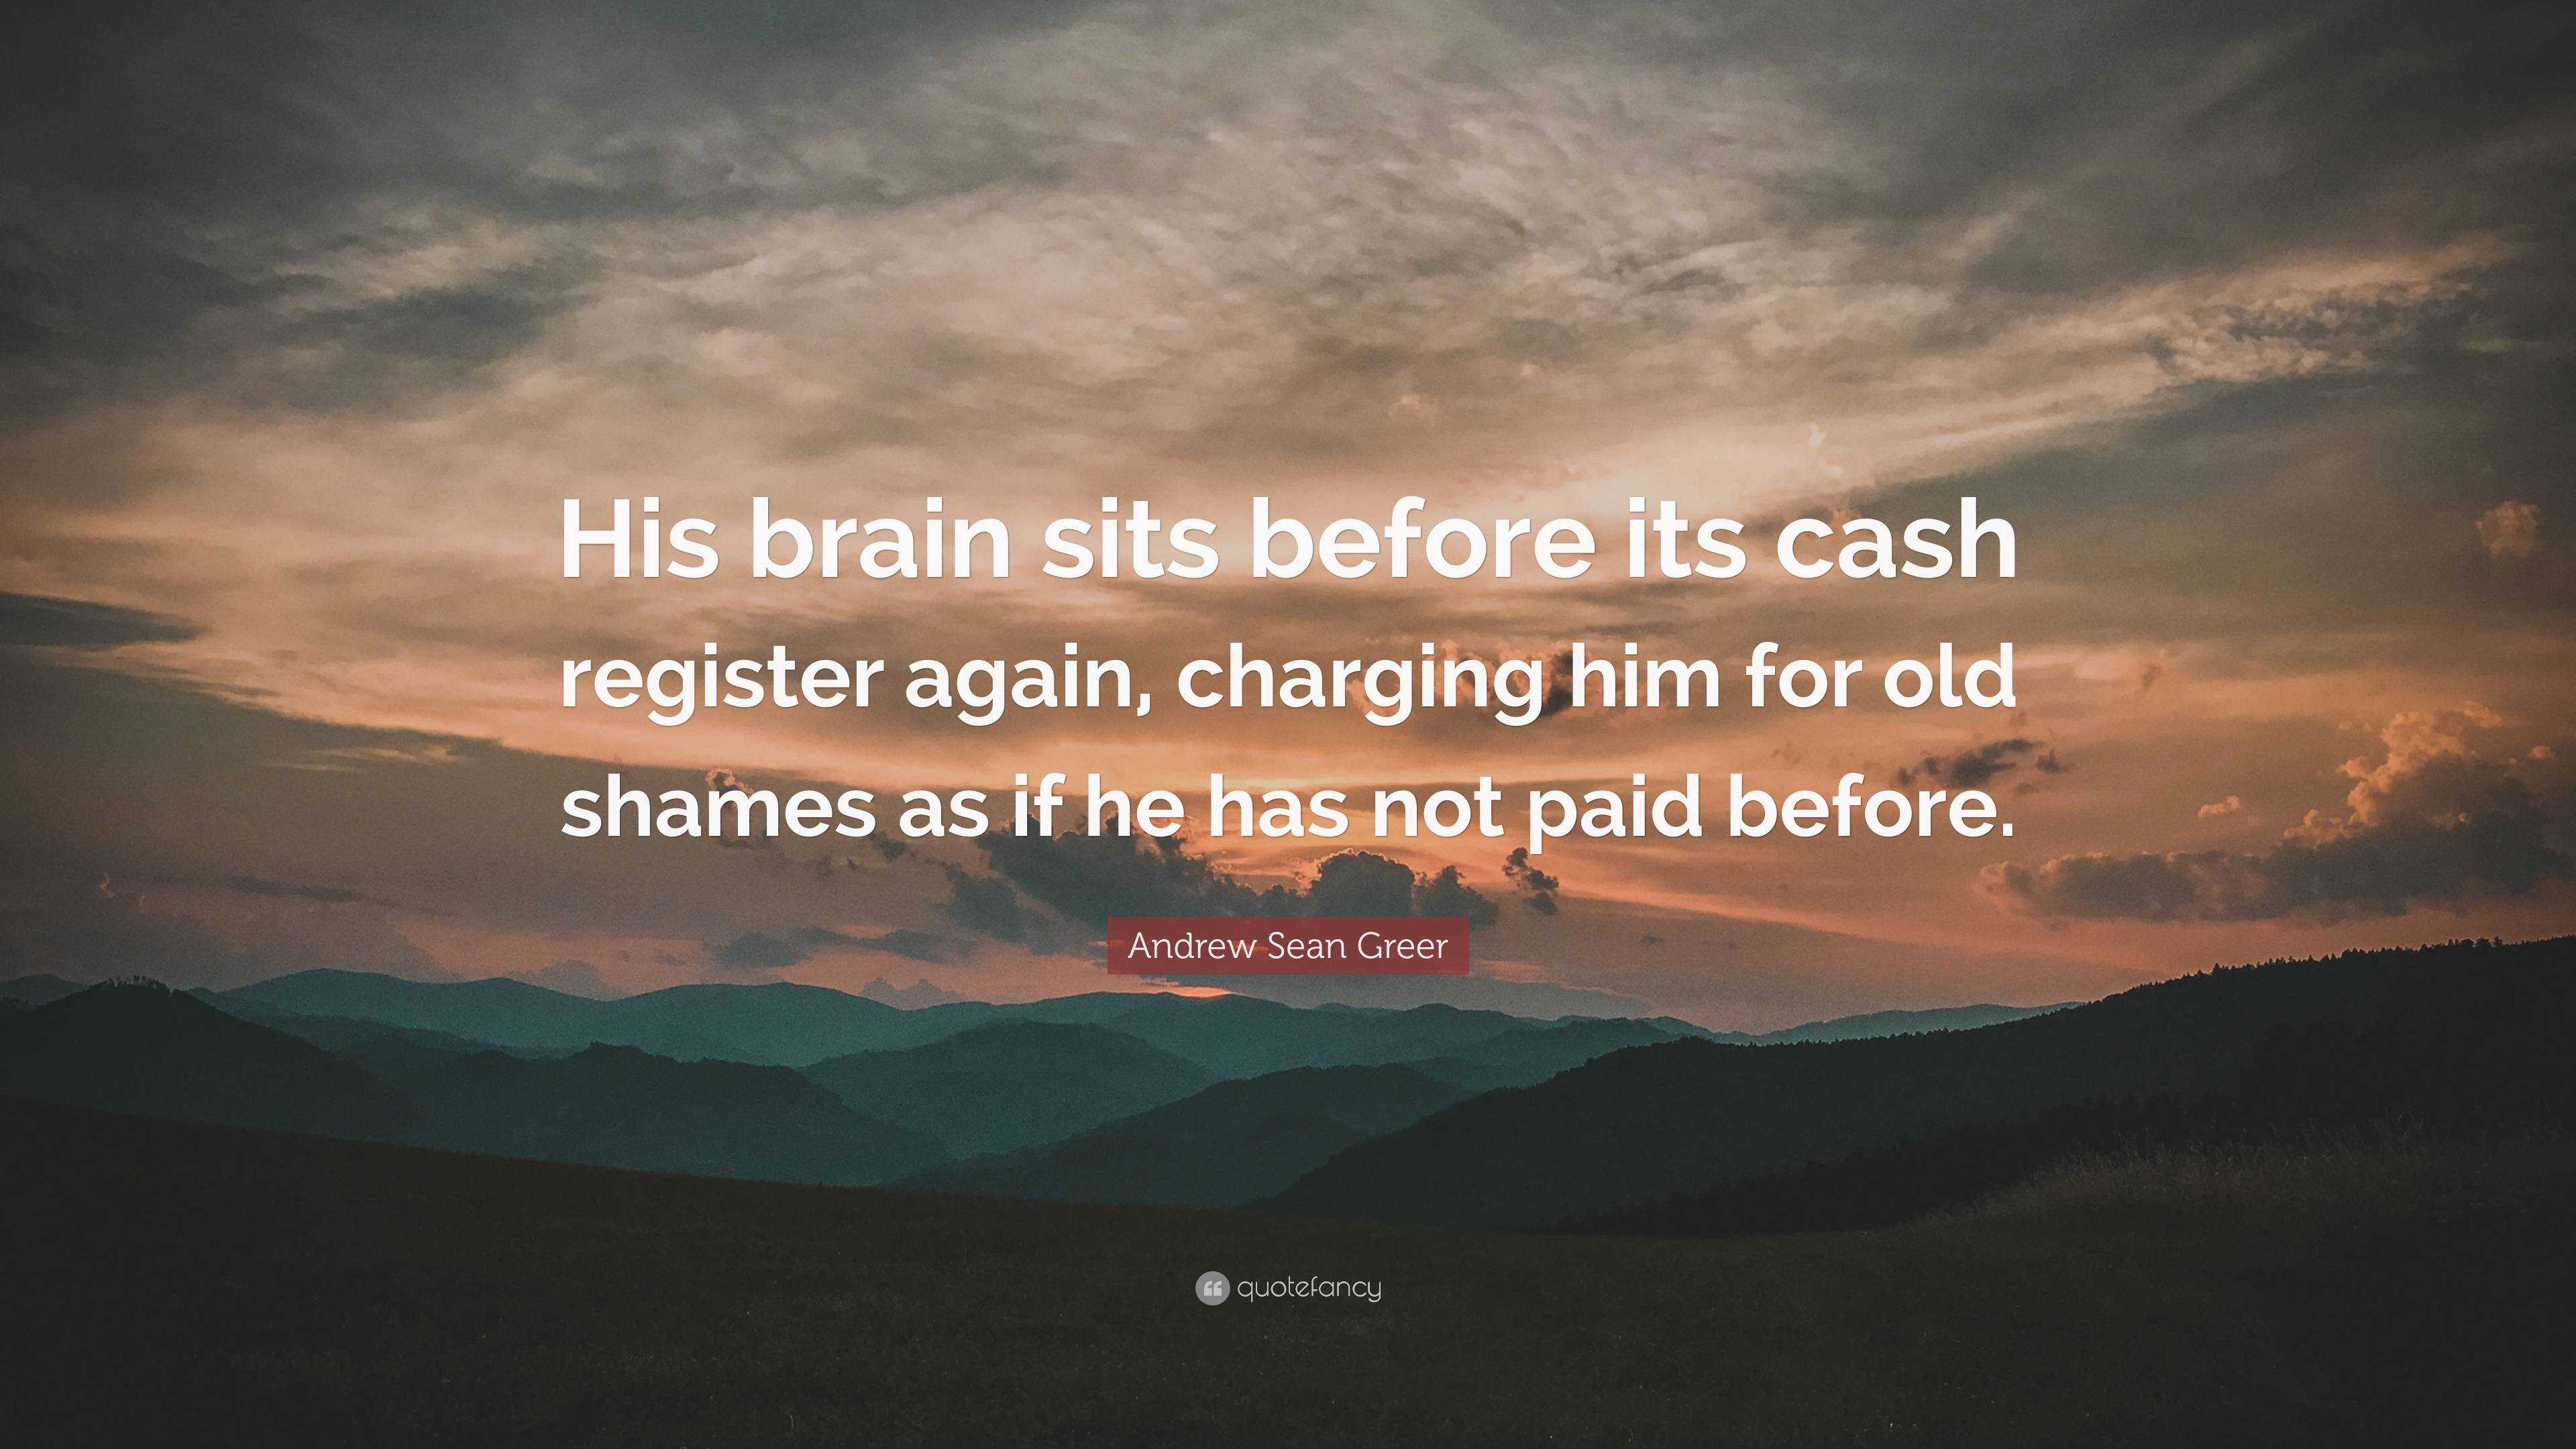 Andrew Sean Greer Quote: “His brain sits before cash again, charging for old